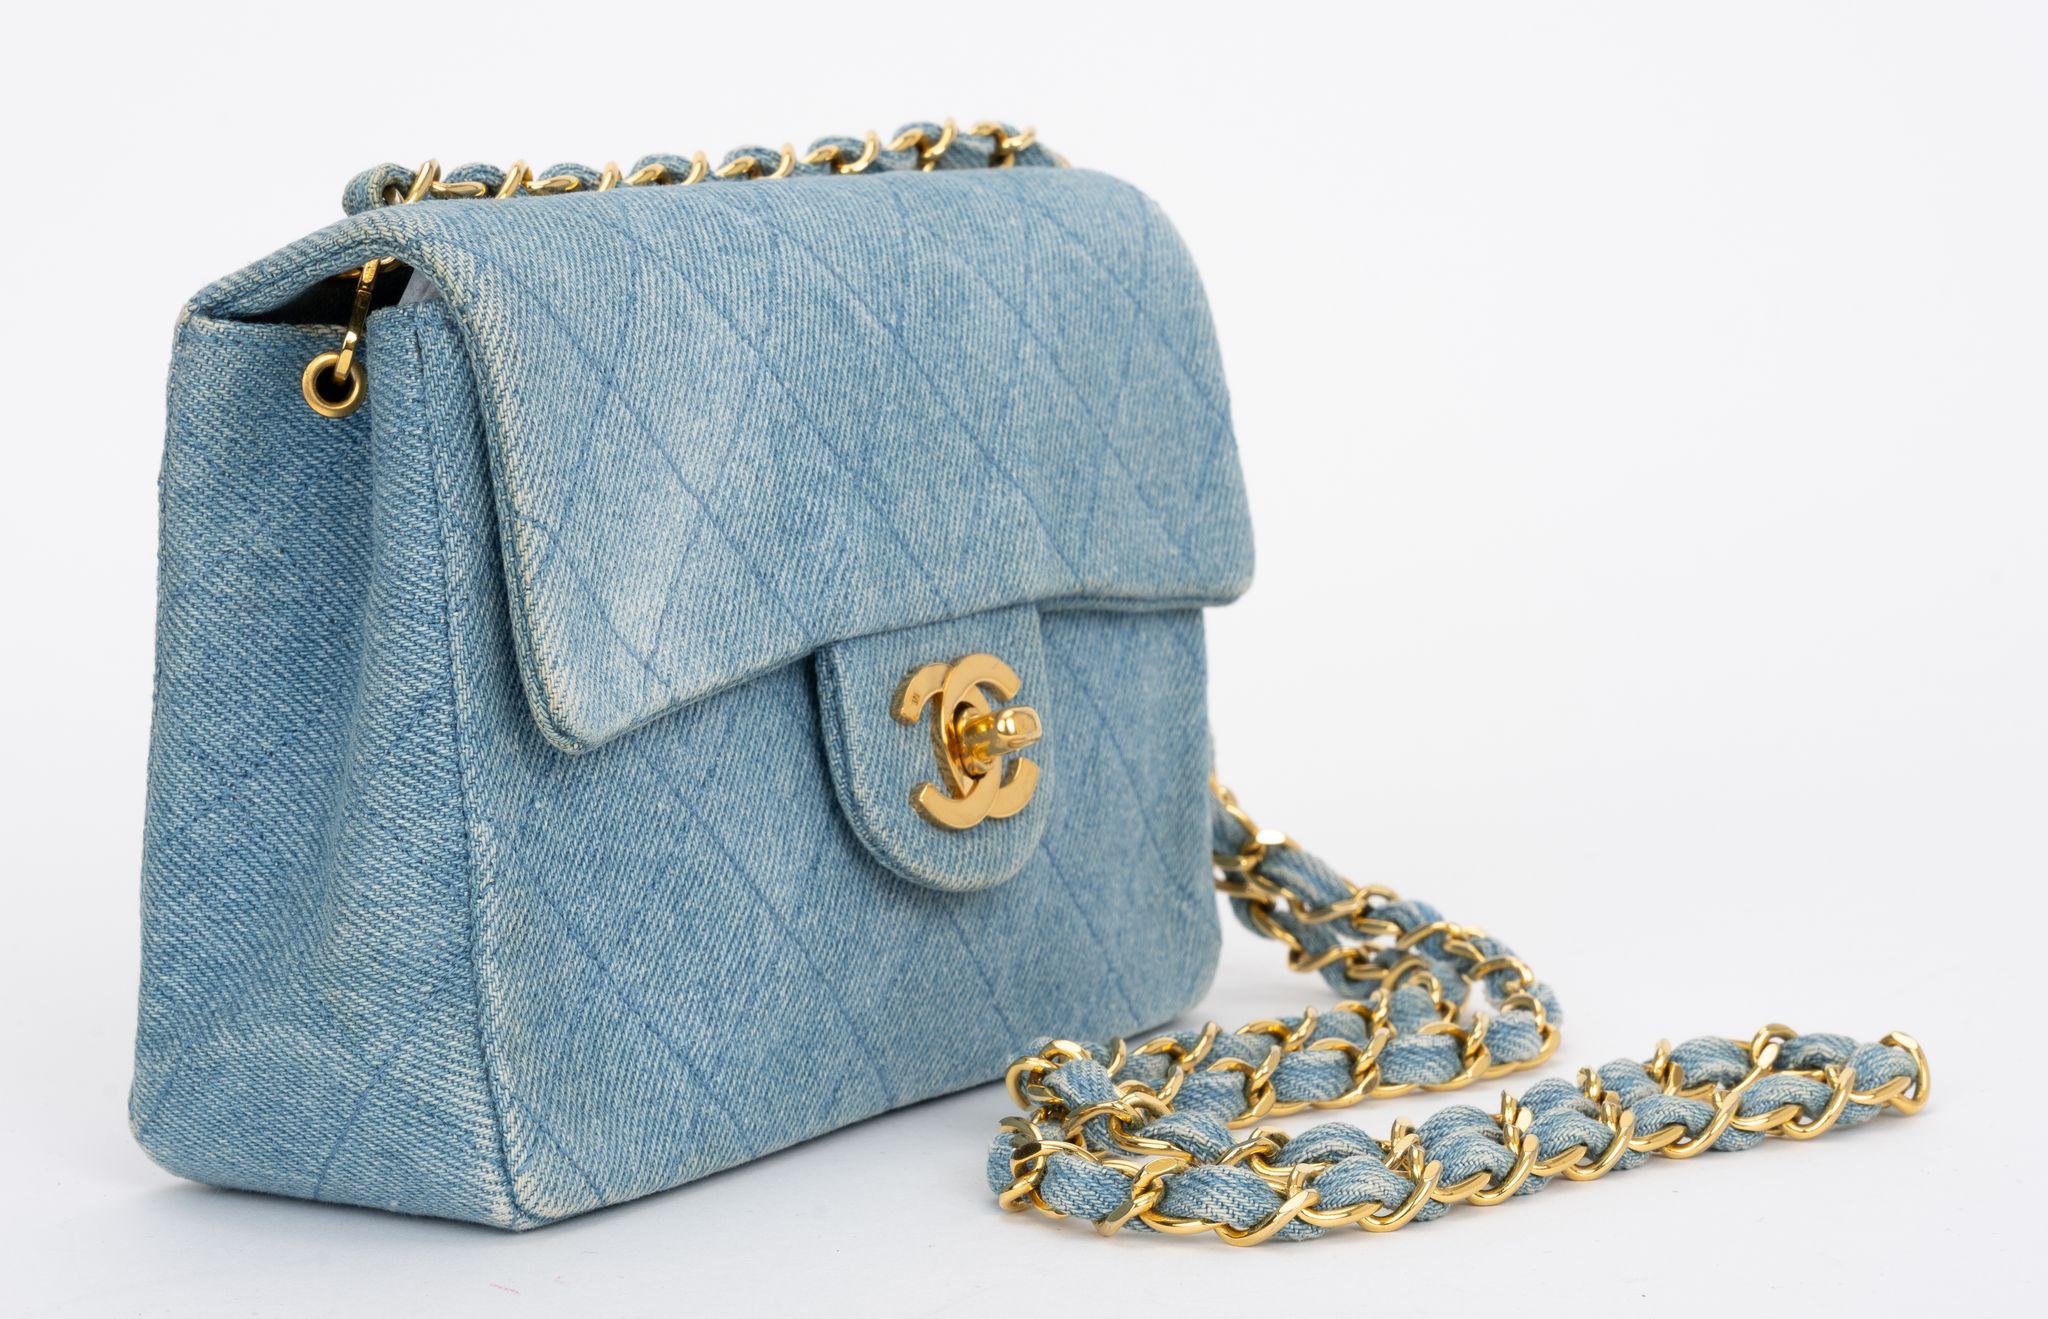 The Chanel Denim Quilted Flap Bag features a soft quilt denim and a gold chain link threaded shoulder strap and CC turn lock. Interior has one Zipper pockets and patch pockets.
Shoulder drop 21